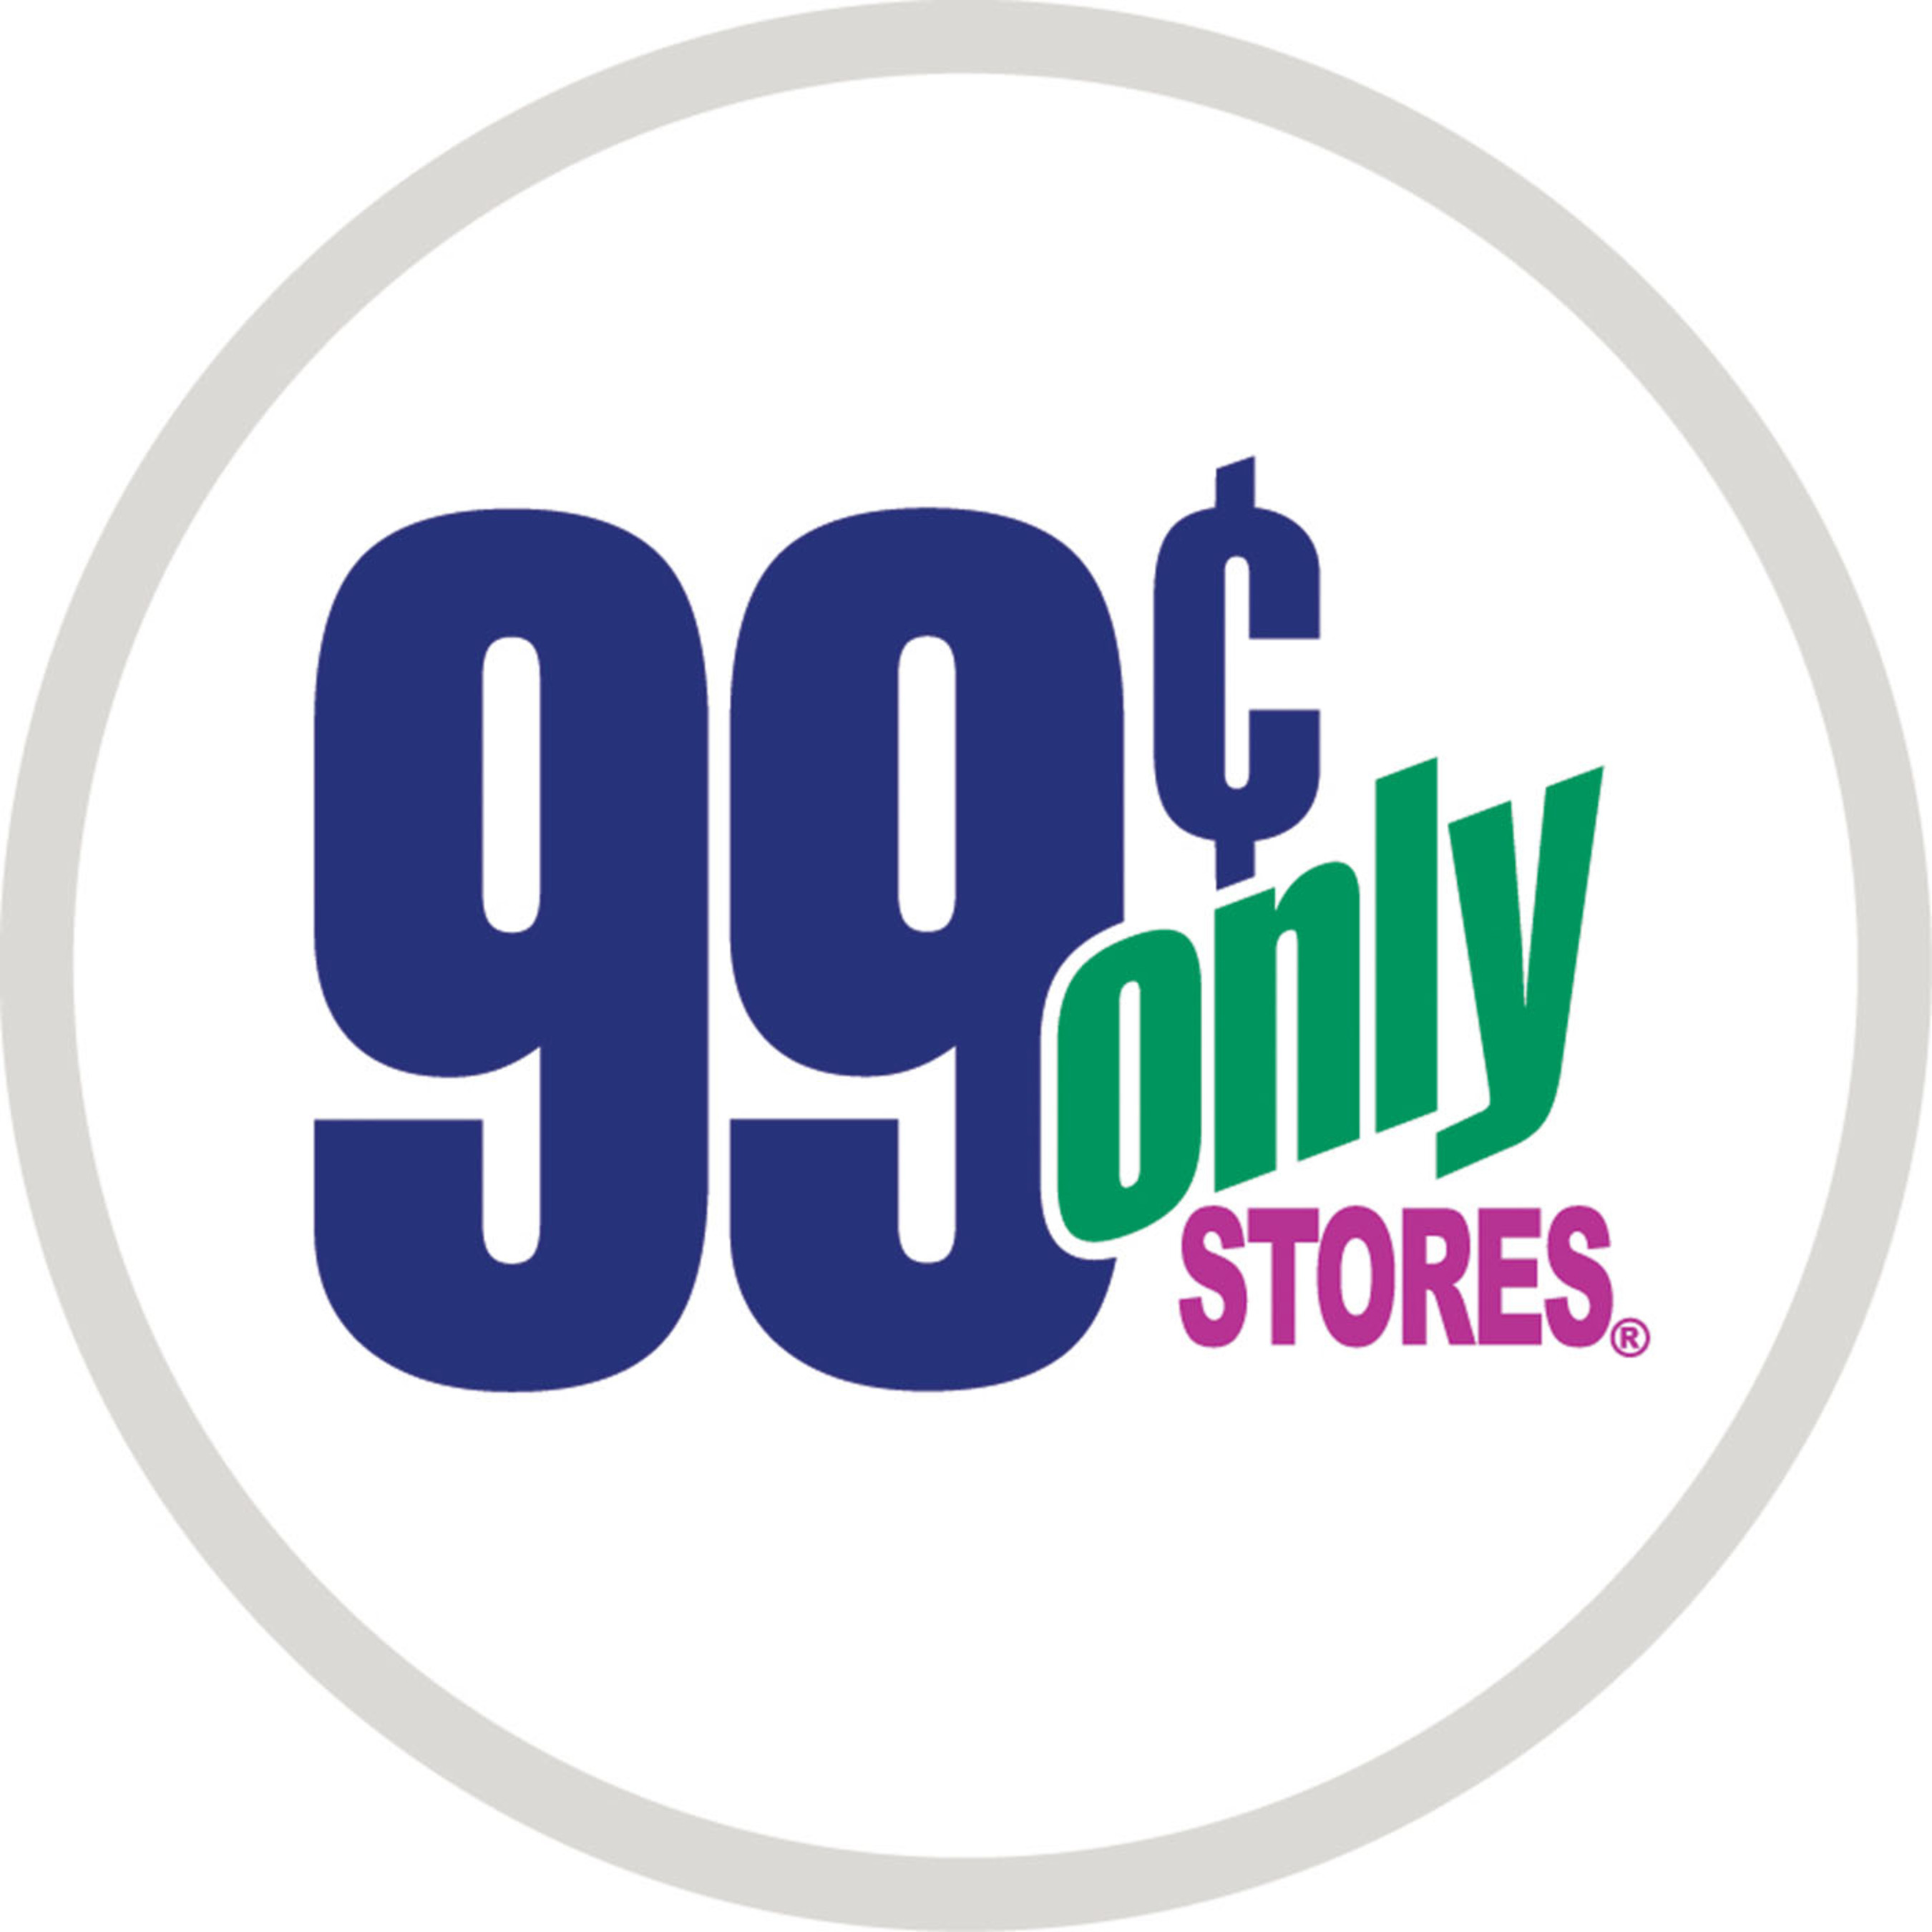 99 Cents Only Stores LLC